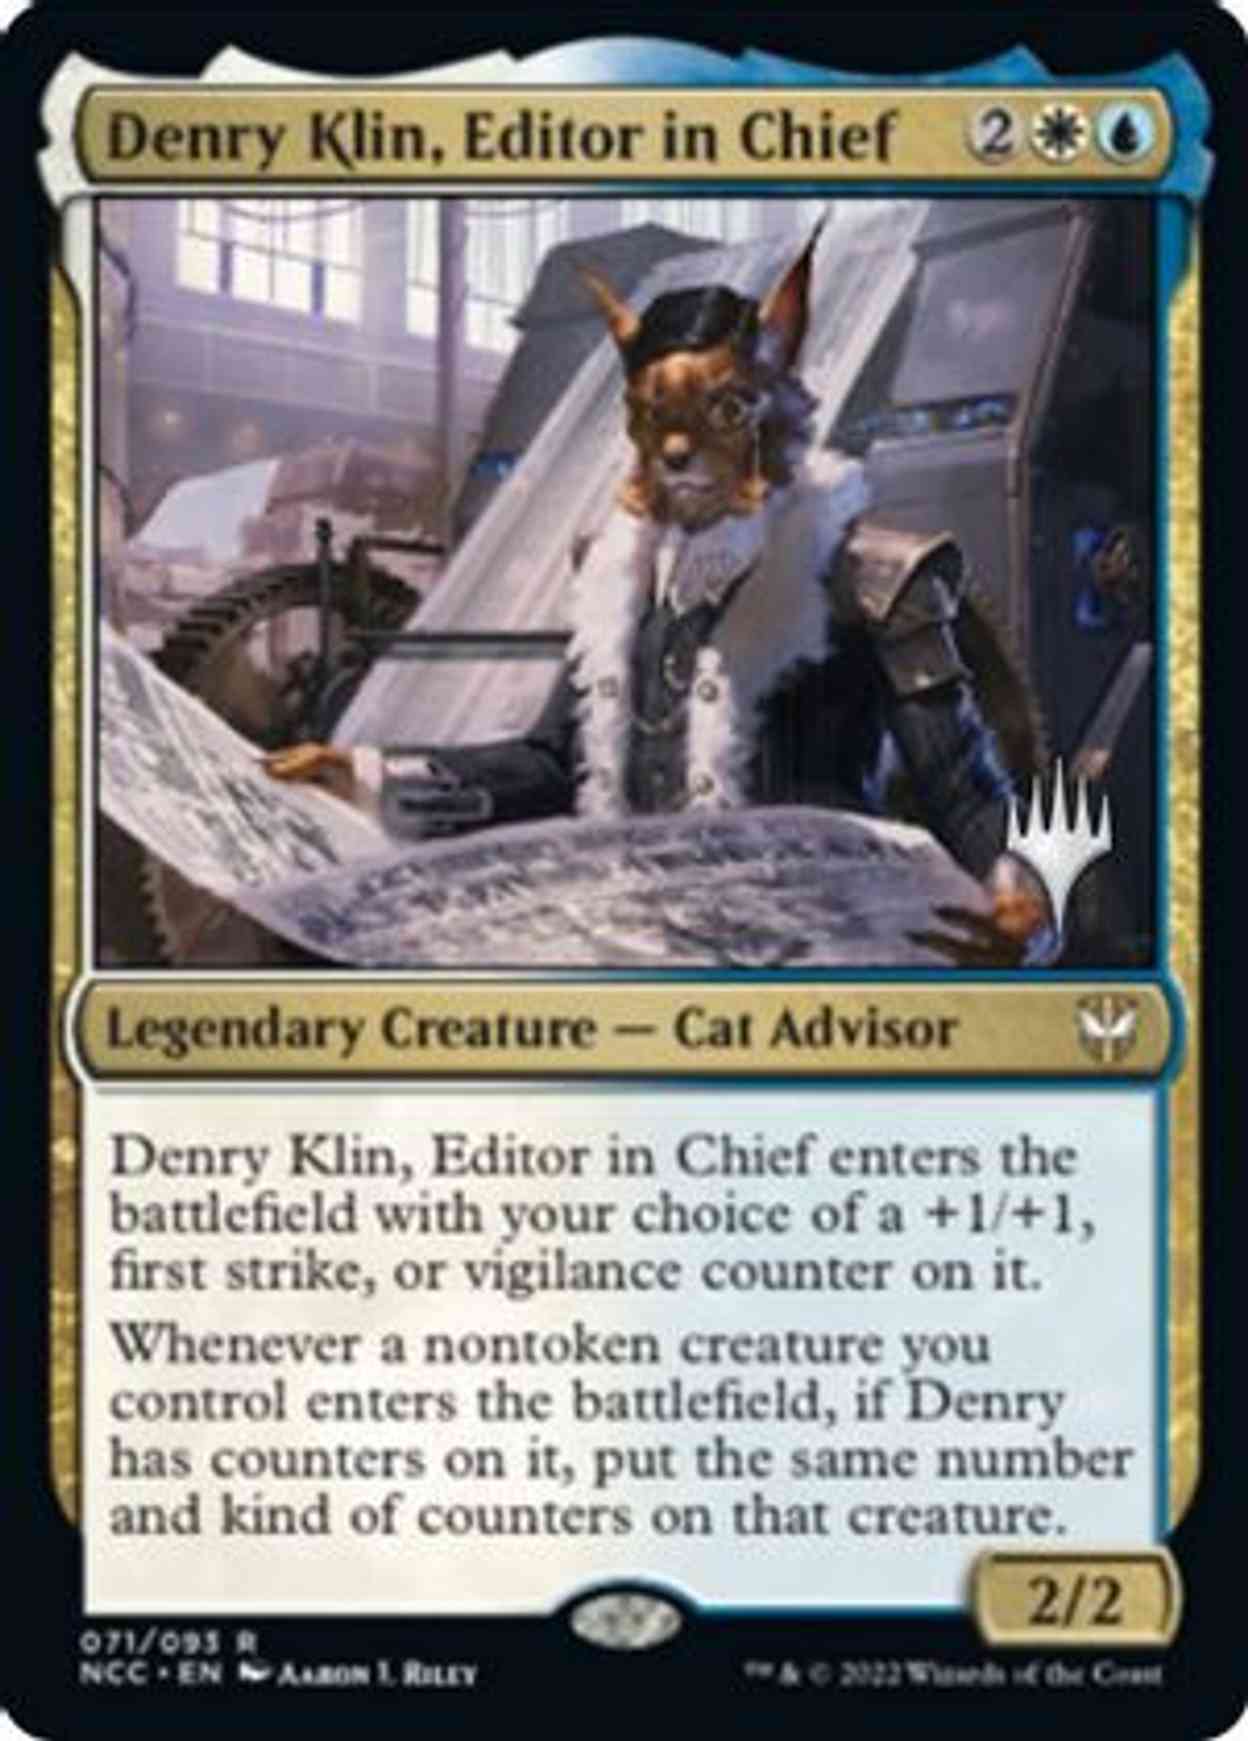 Denry Klin, Editor in Chief magic card front